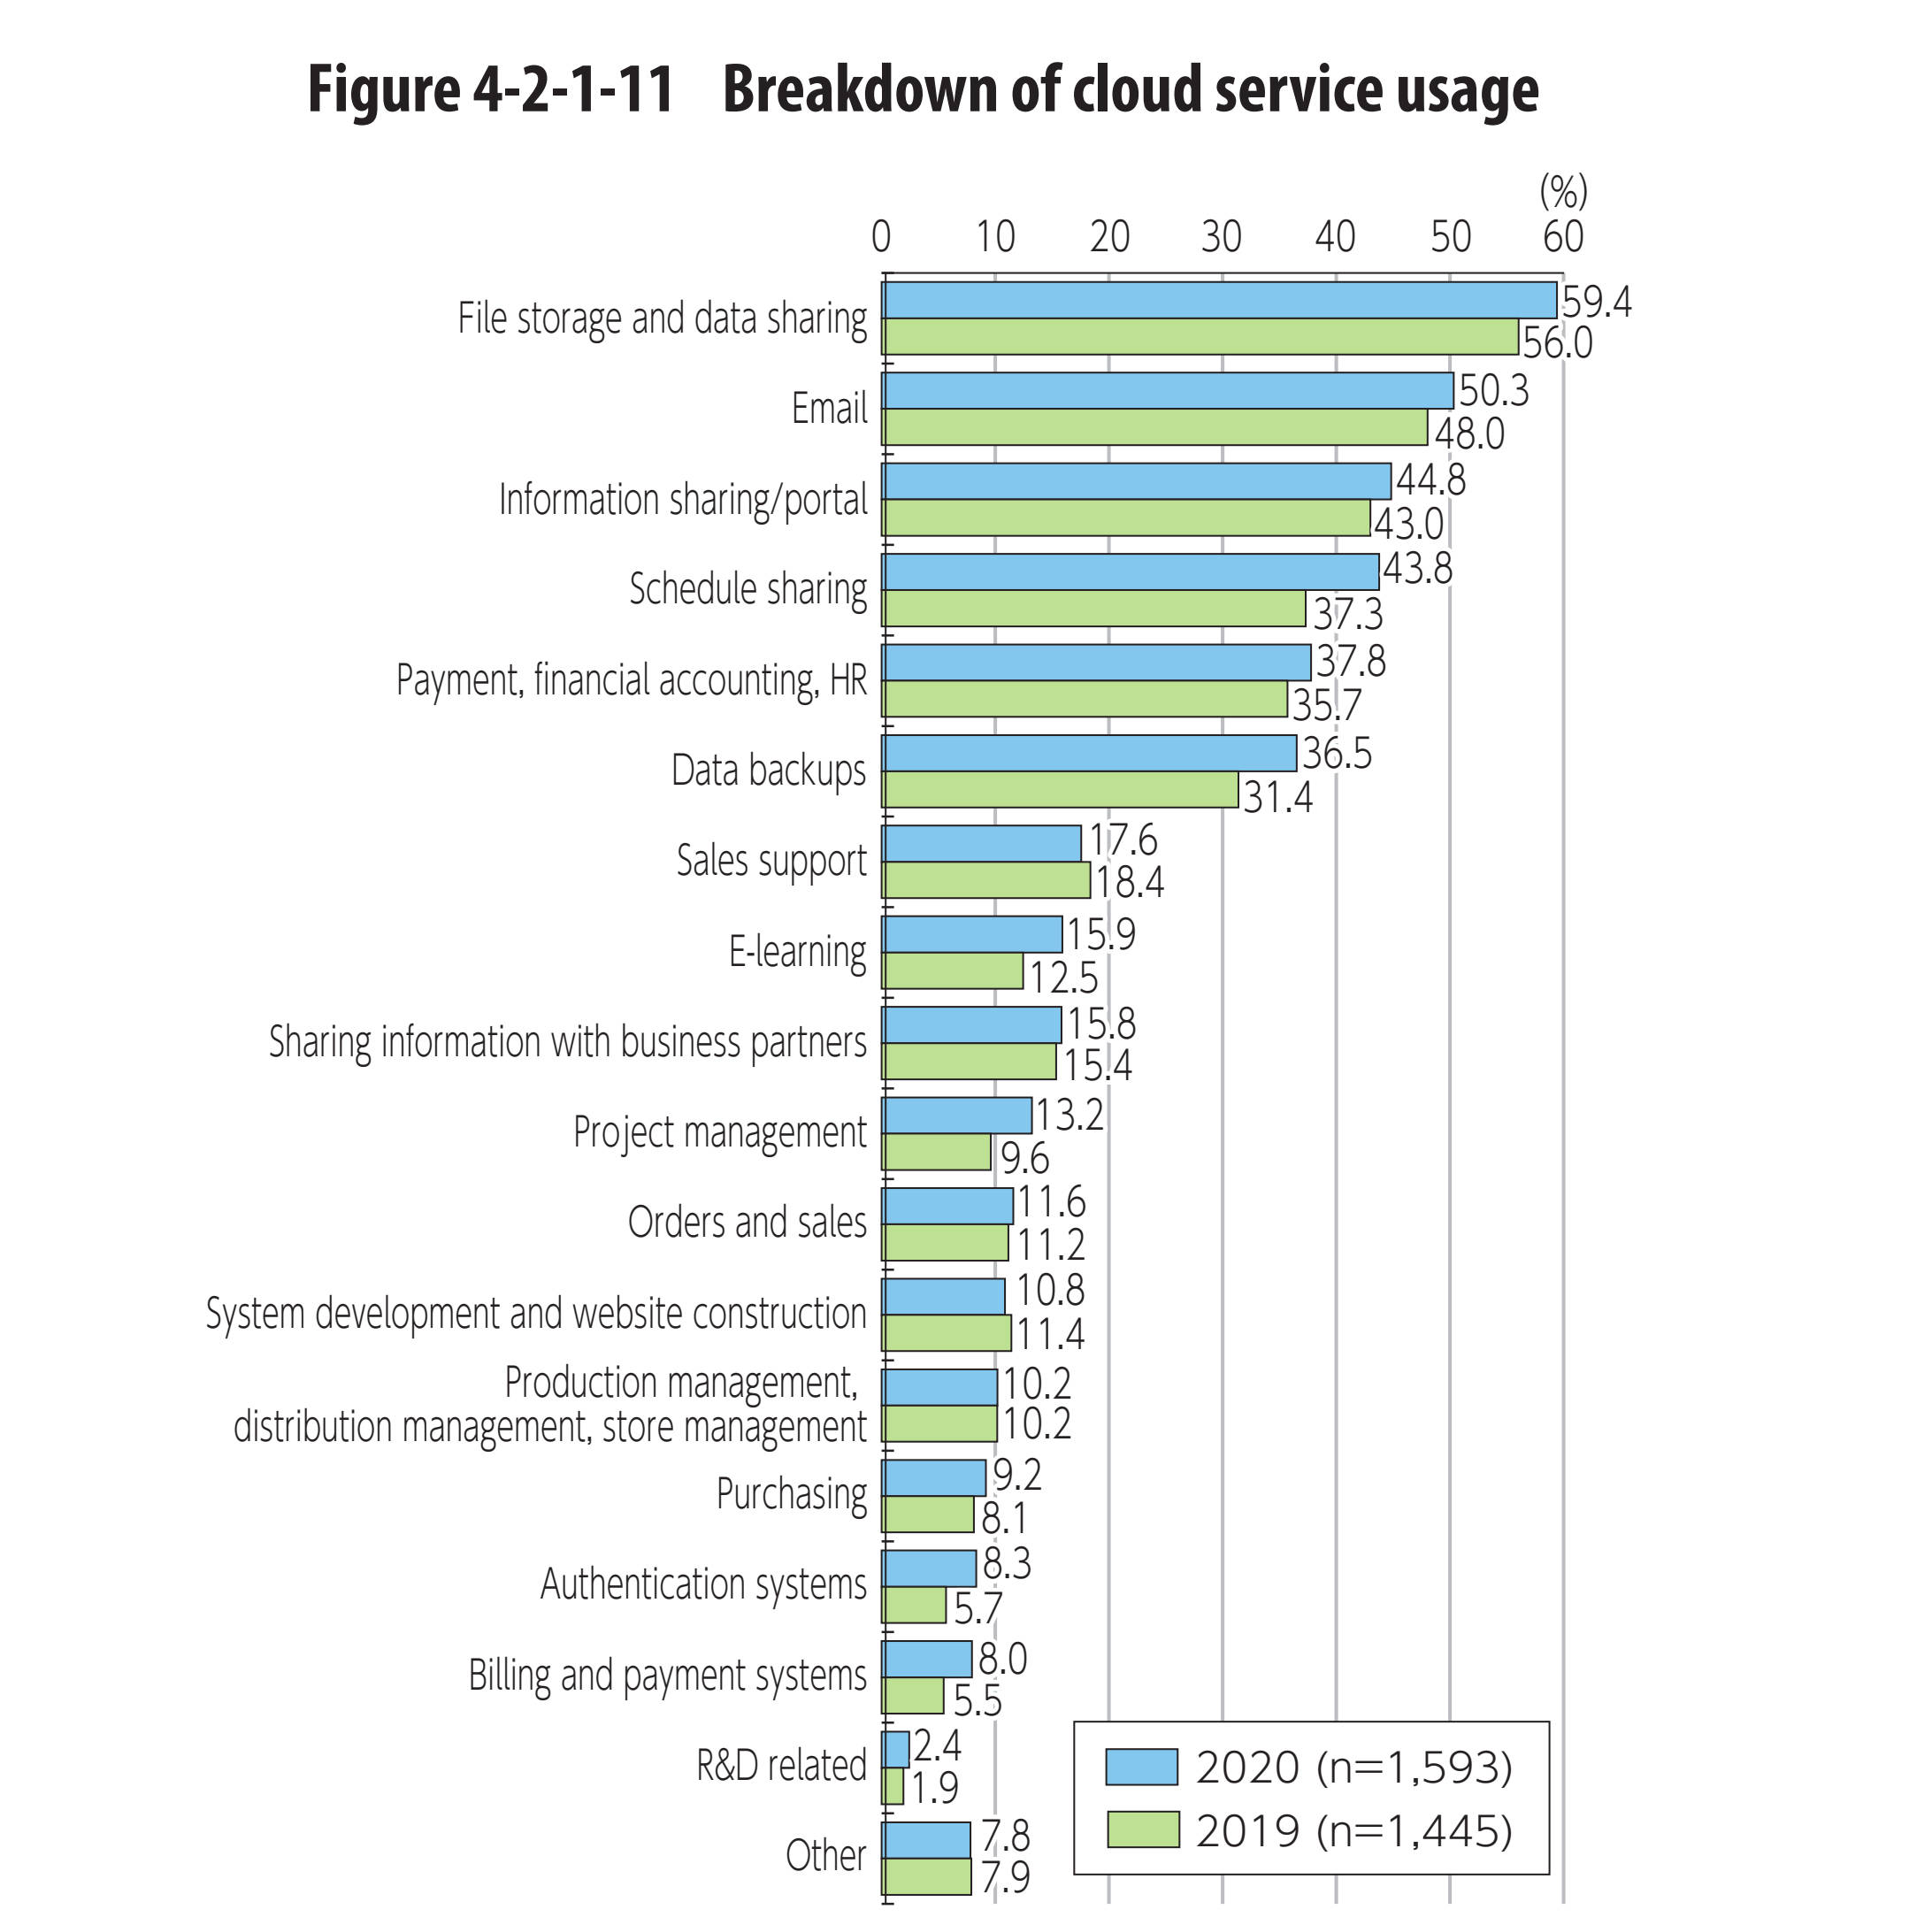 Breackdown of cloud service usage in Japan